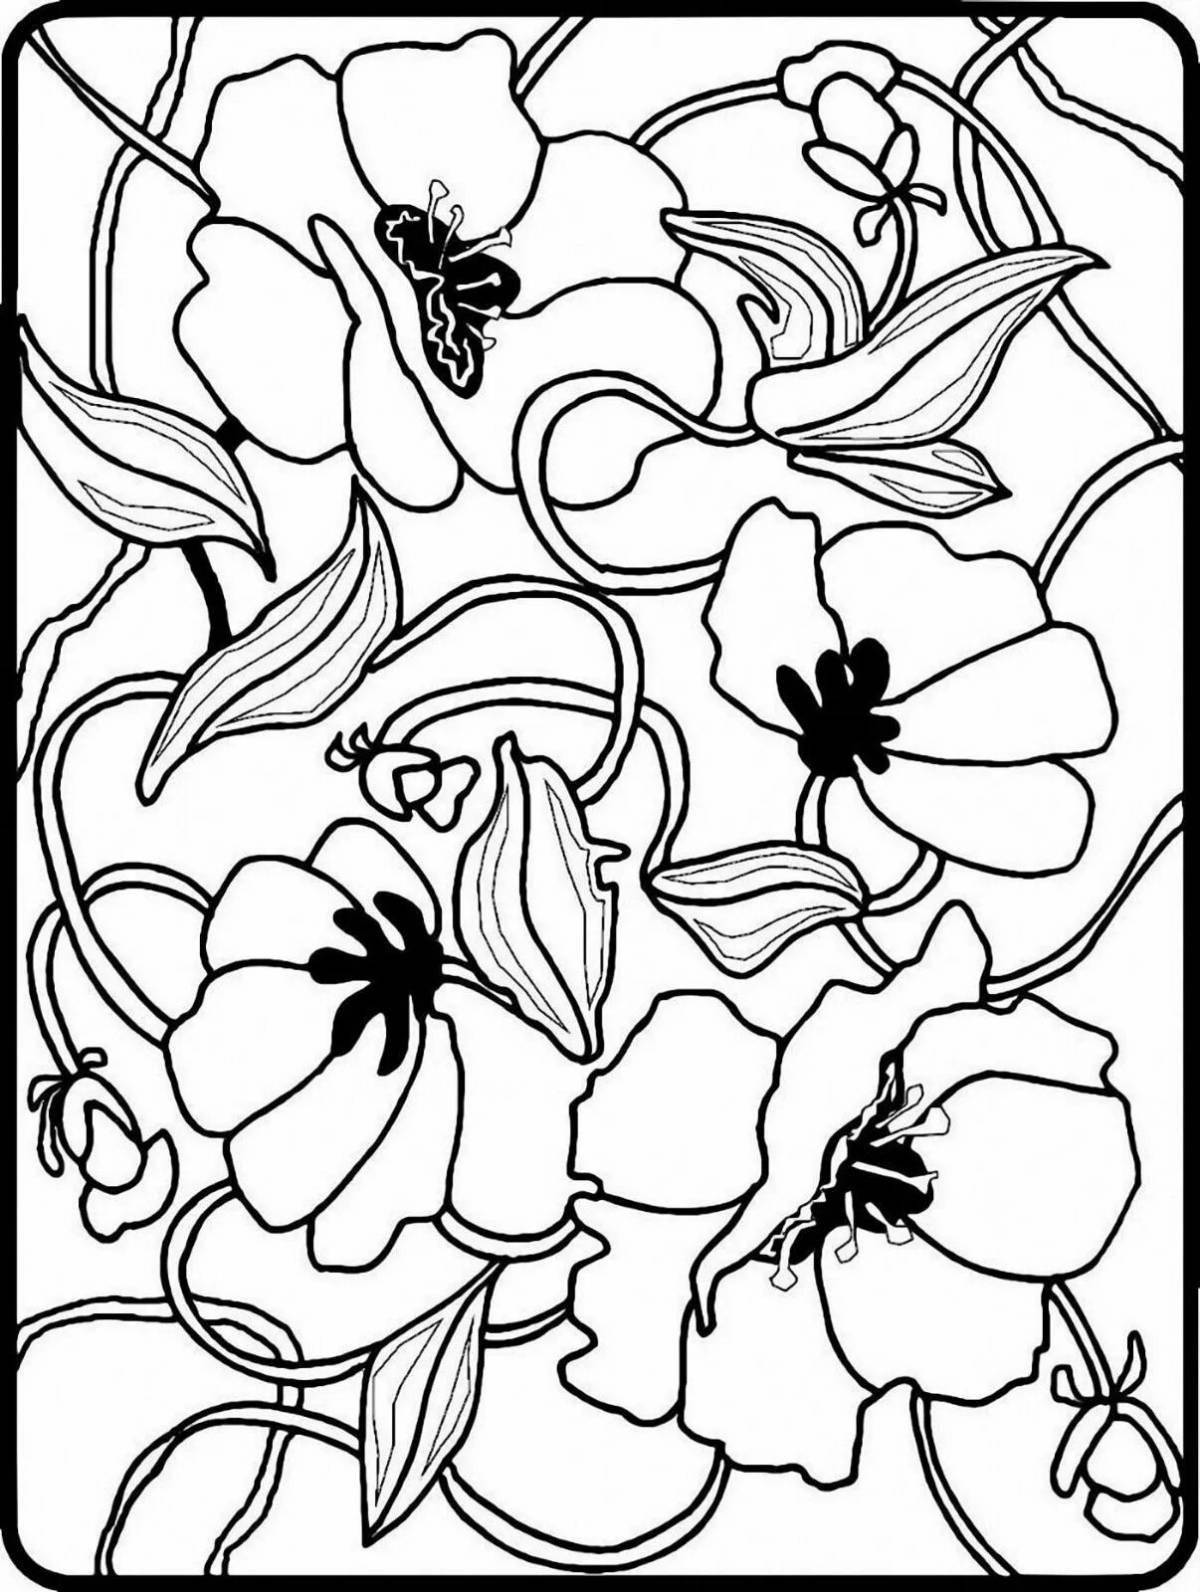 Attractive acrylic paint coloring page